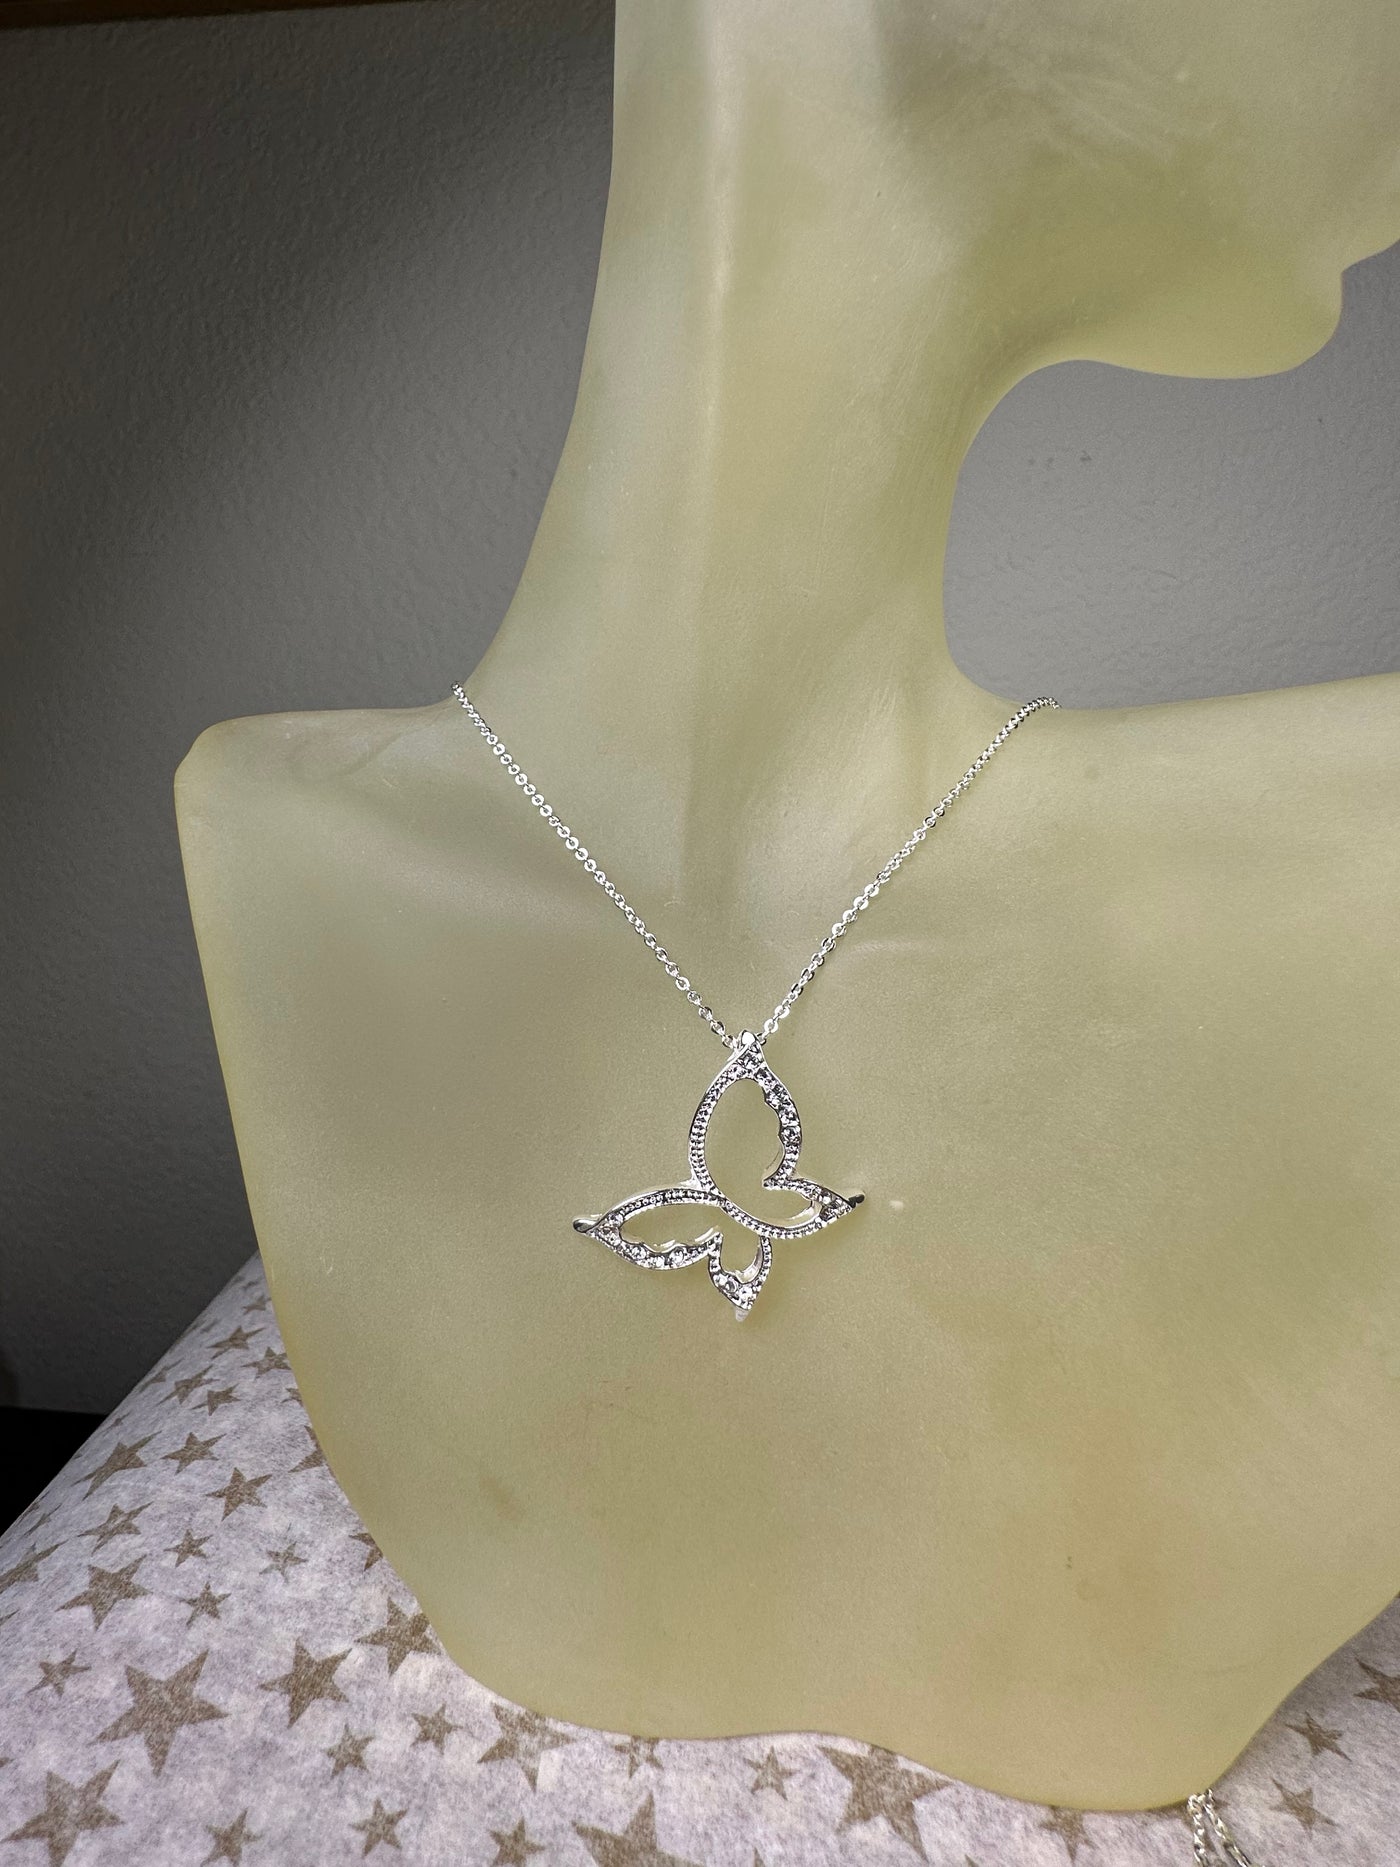 Silver Tone Crystal Contour Butterfly Pendant Necklace